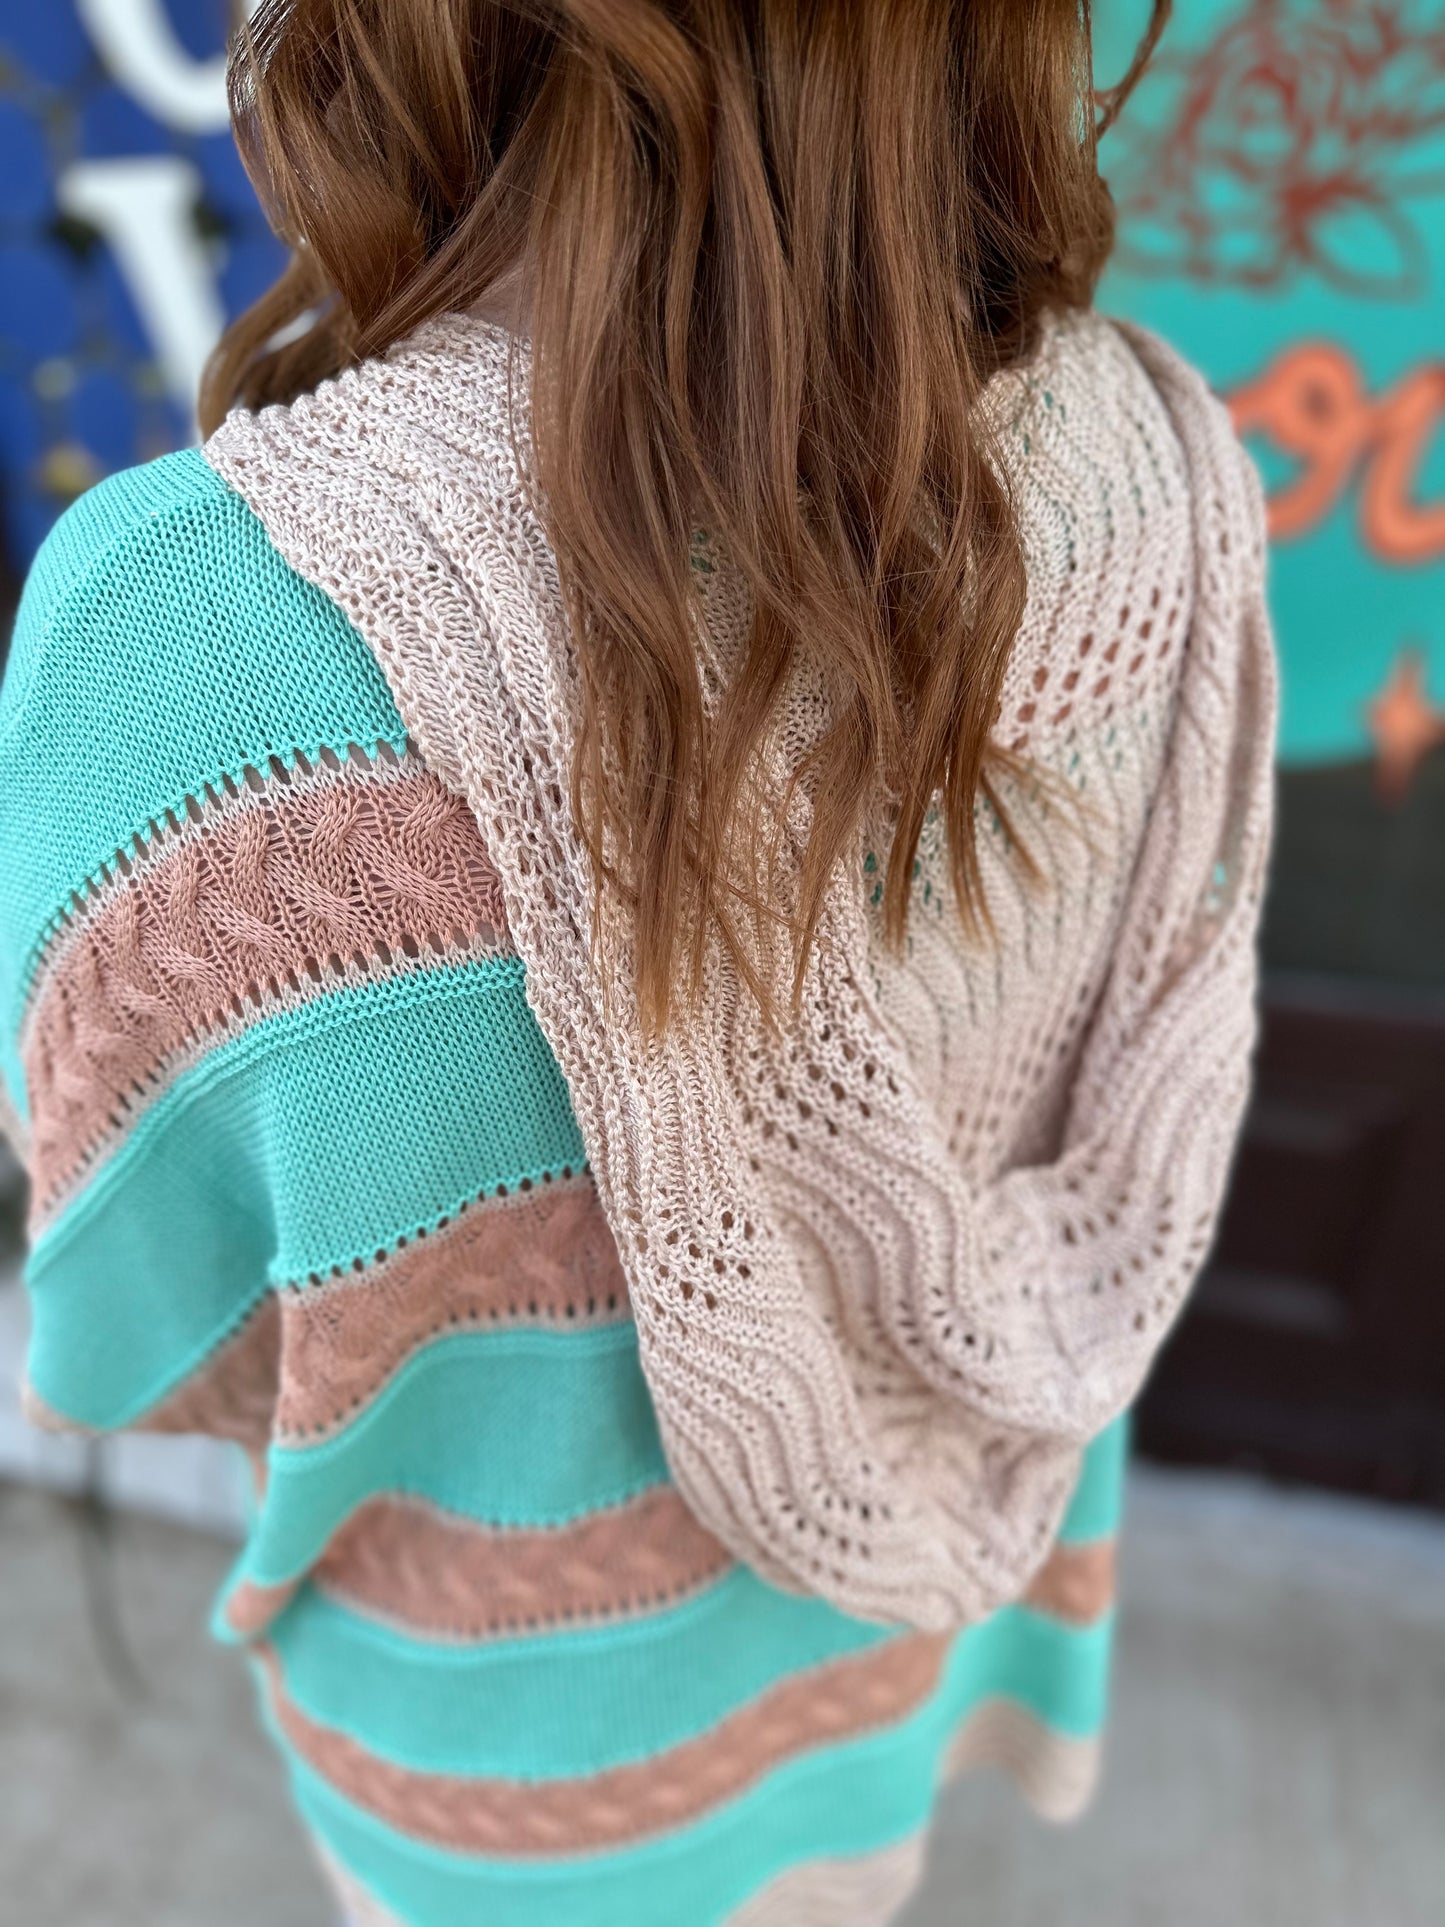 Women's Turquoise Crochet Knit Cover Up